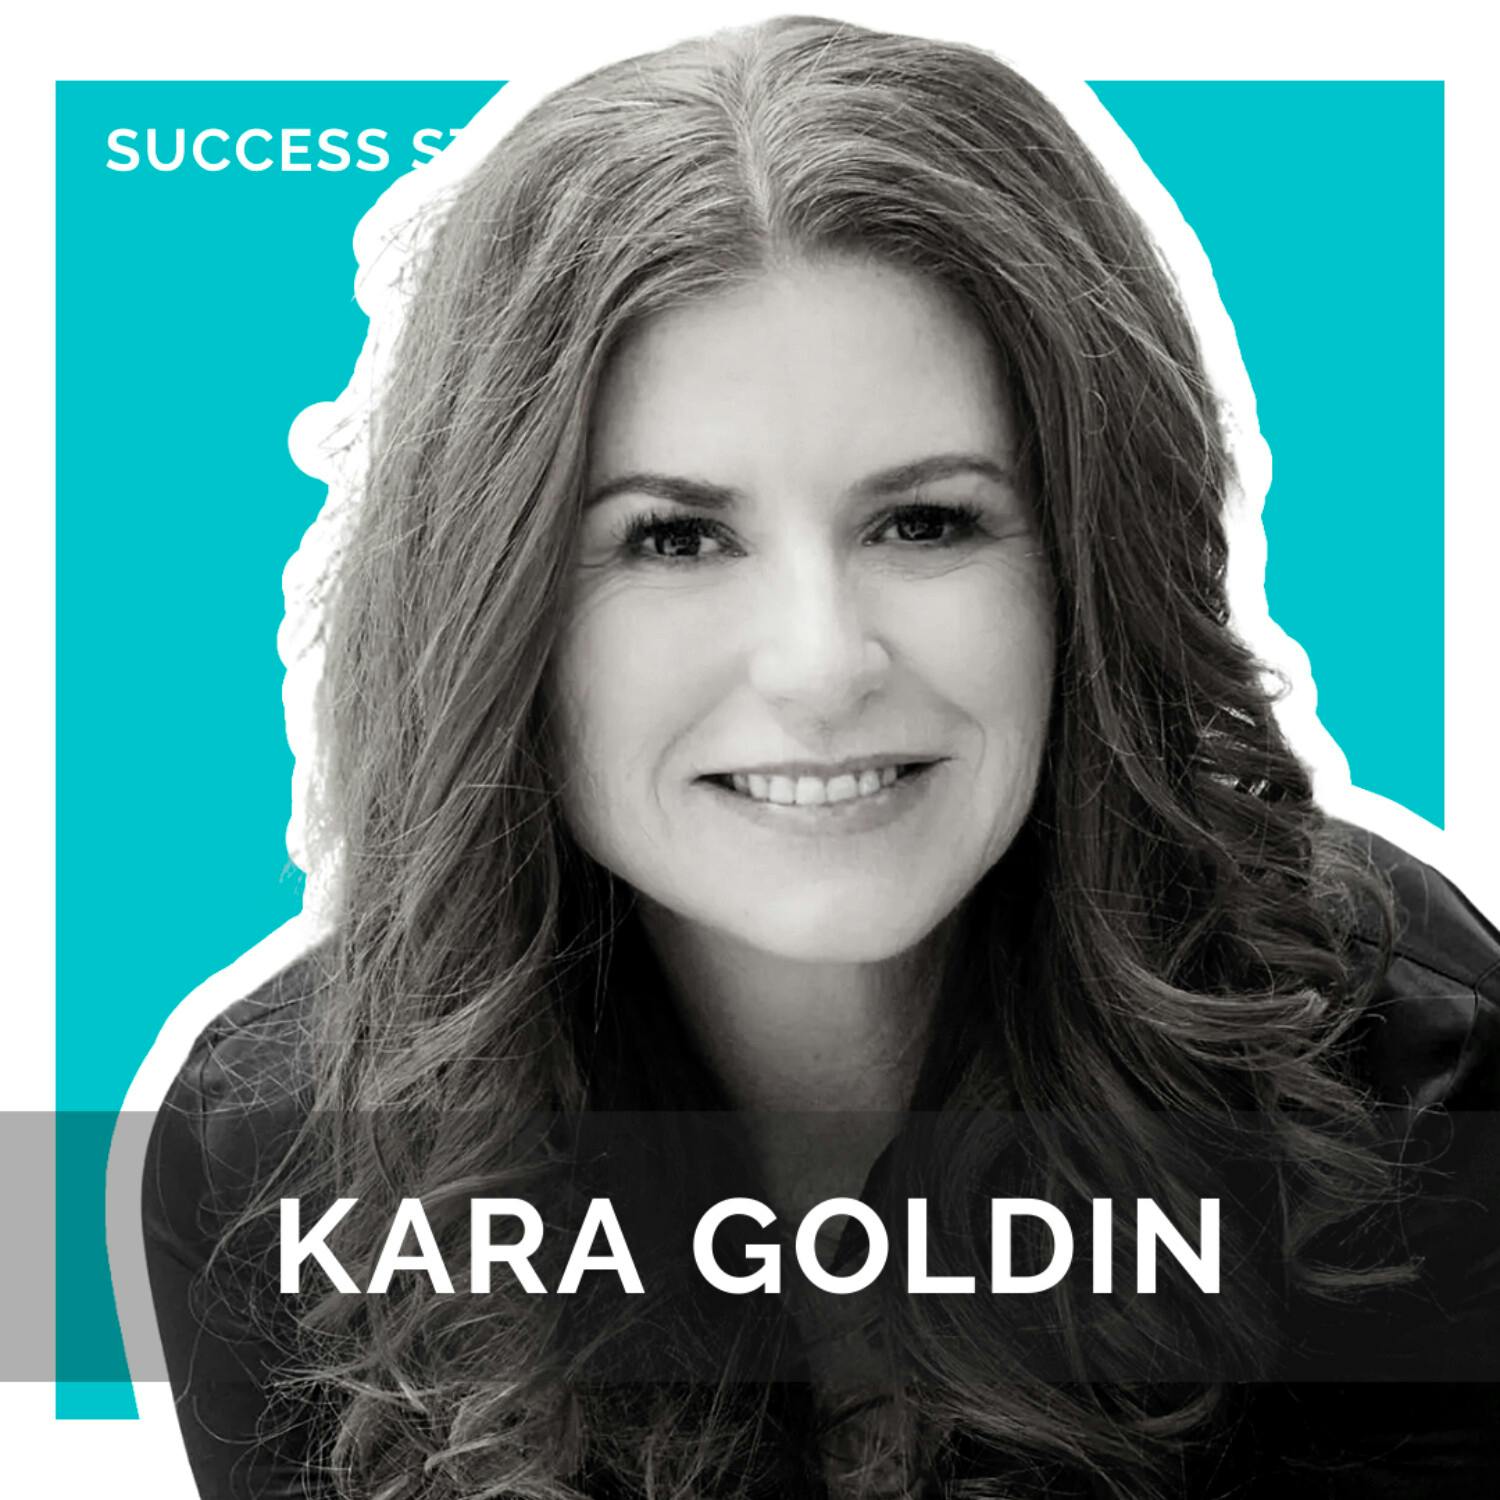 Kara Goldin, Founder of Hint | Living an Undaunted Life by Overcoming Doubts and Doubters